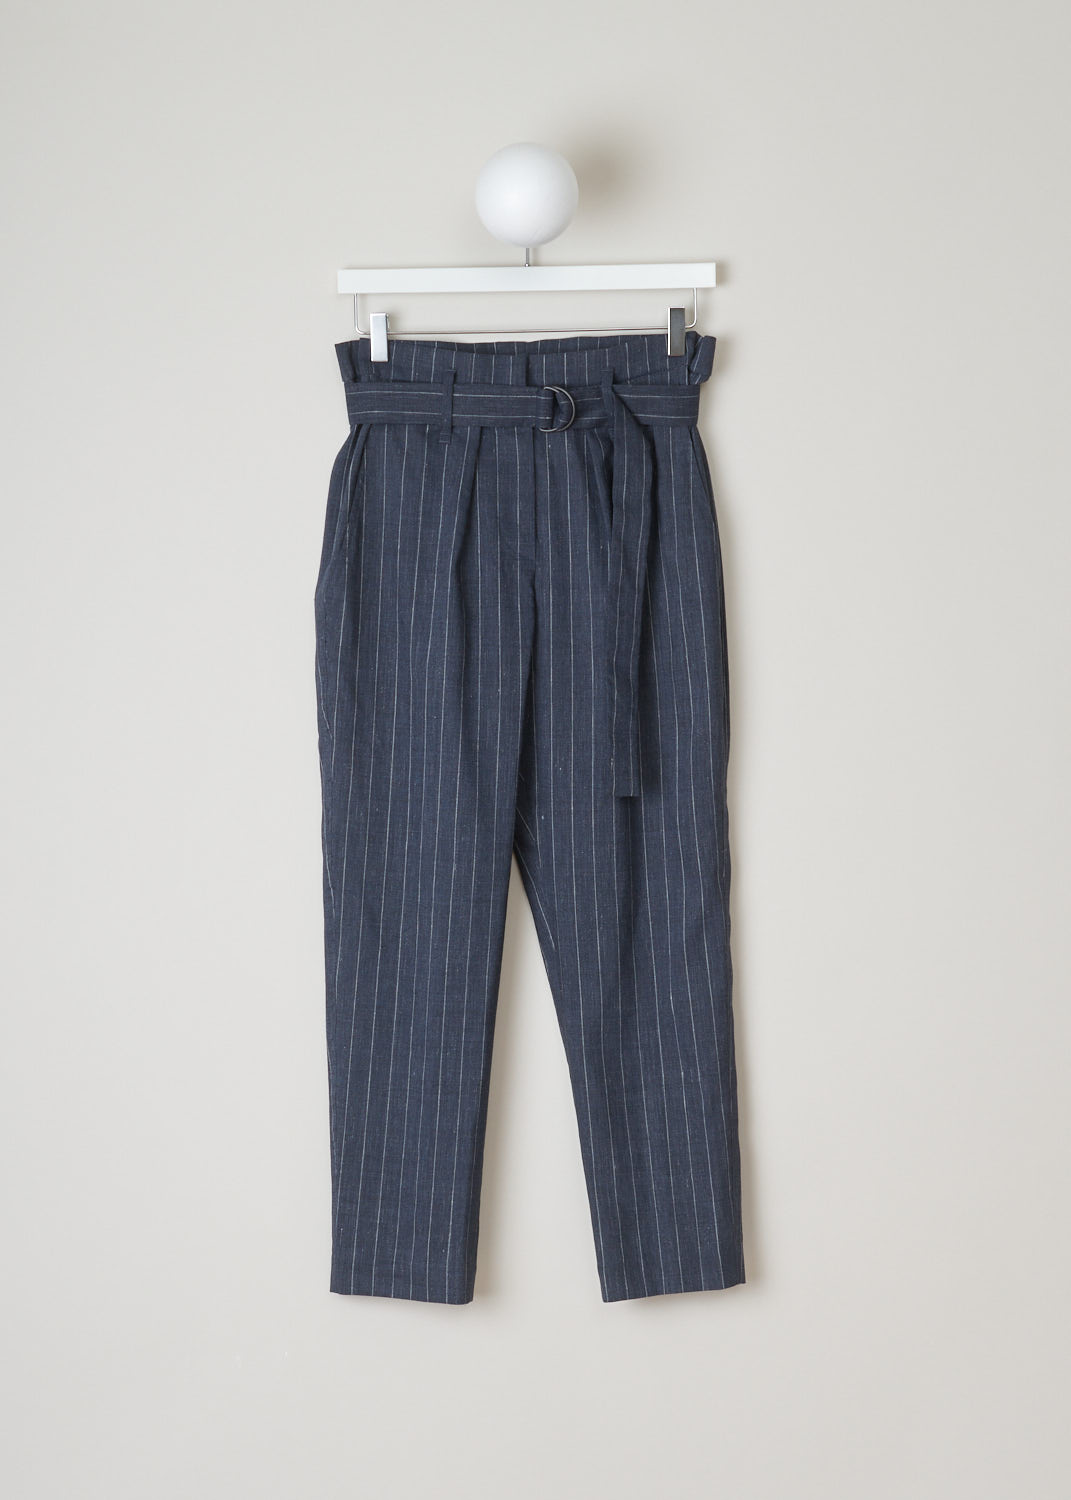 Burnello cucineli, high-waist pinstripe pants, MF554P6588_C003, blue grey, front, Shaped for a high-waist fit. This paper-bag waist pants is designed with straight cropped legs and soft pleats that fall from the waistband. Comes with matching D-ring belt, slanted side pockets and welt pockets on the back. Fastening option on this model is the D-ring belt plus two metal clips and a backing buttons above the zipper.